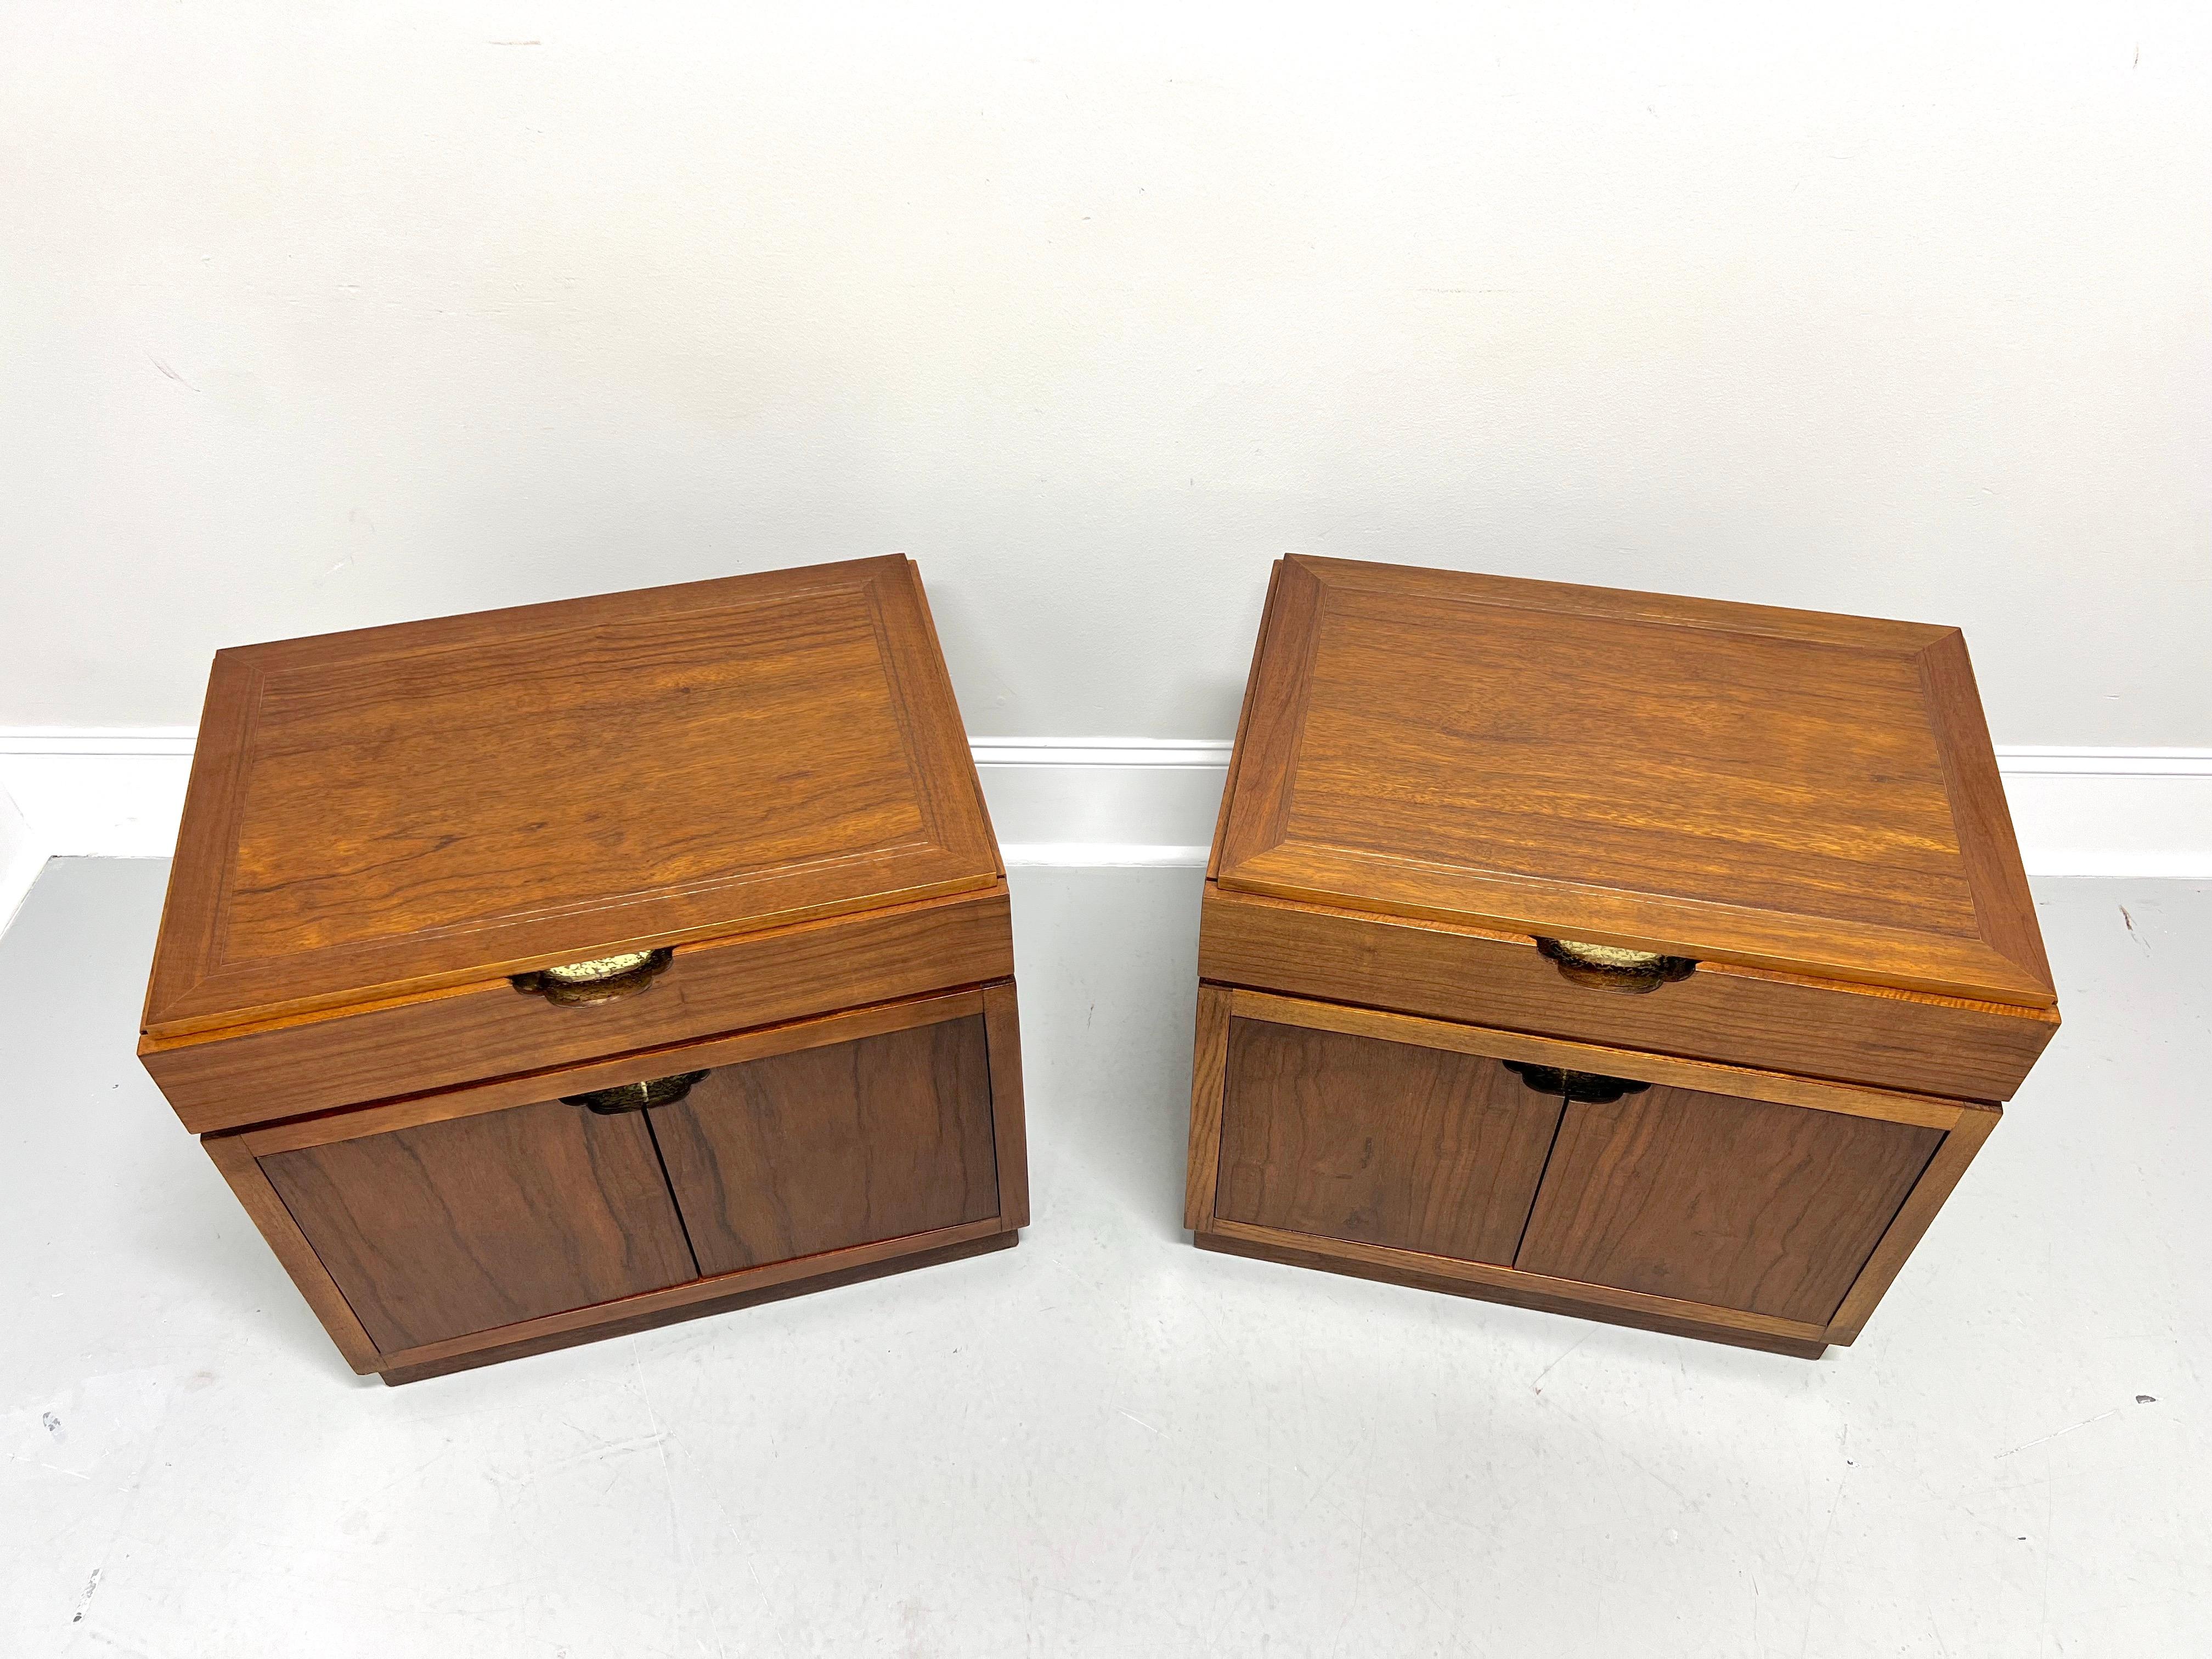 A pair of Asian inspired nightstands by Baker Furniture. Walnut frame & top, rosewood drawer, doors, side panels & rear panel, banded top, decorative stamped brass accents, wood handles, finished on all sides, and a solid base. Features one drawer